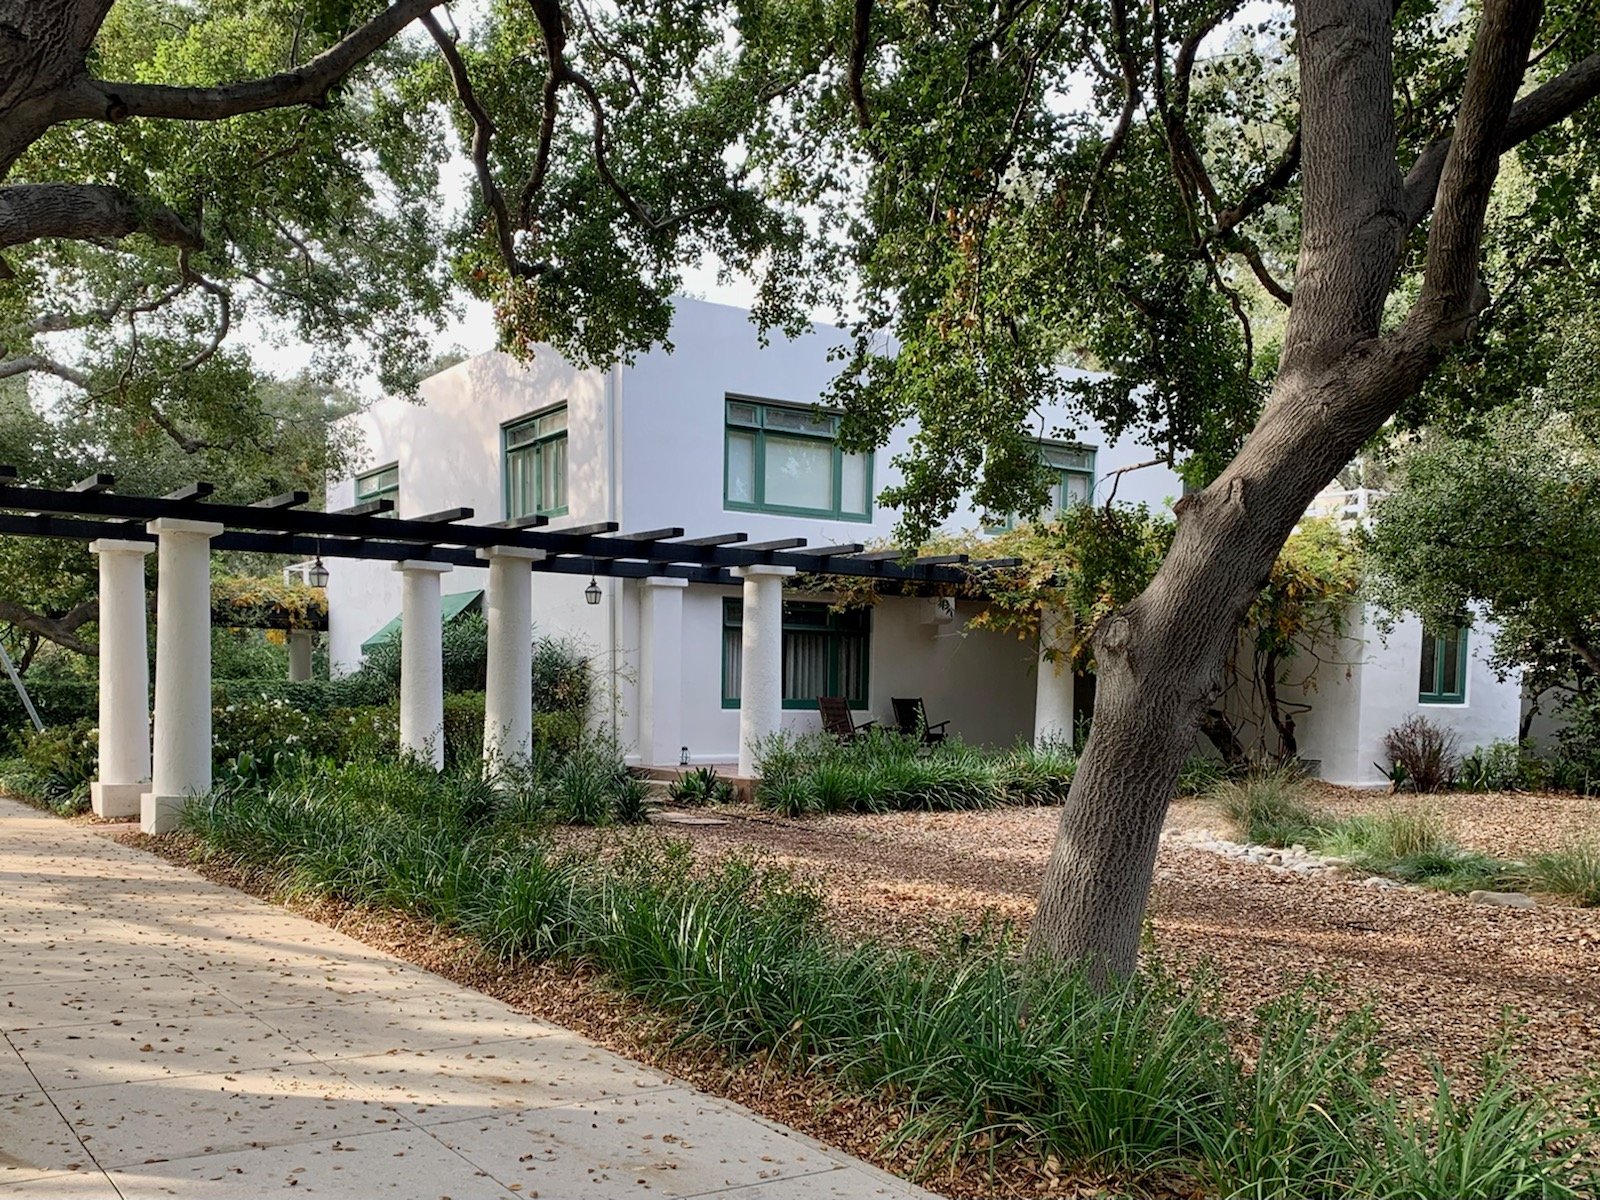  Miltmore House by Irving Gill in South Pasadena 